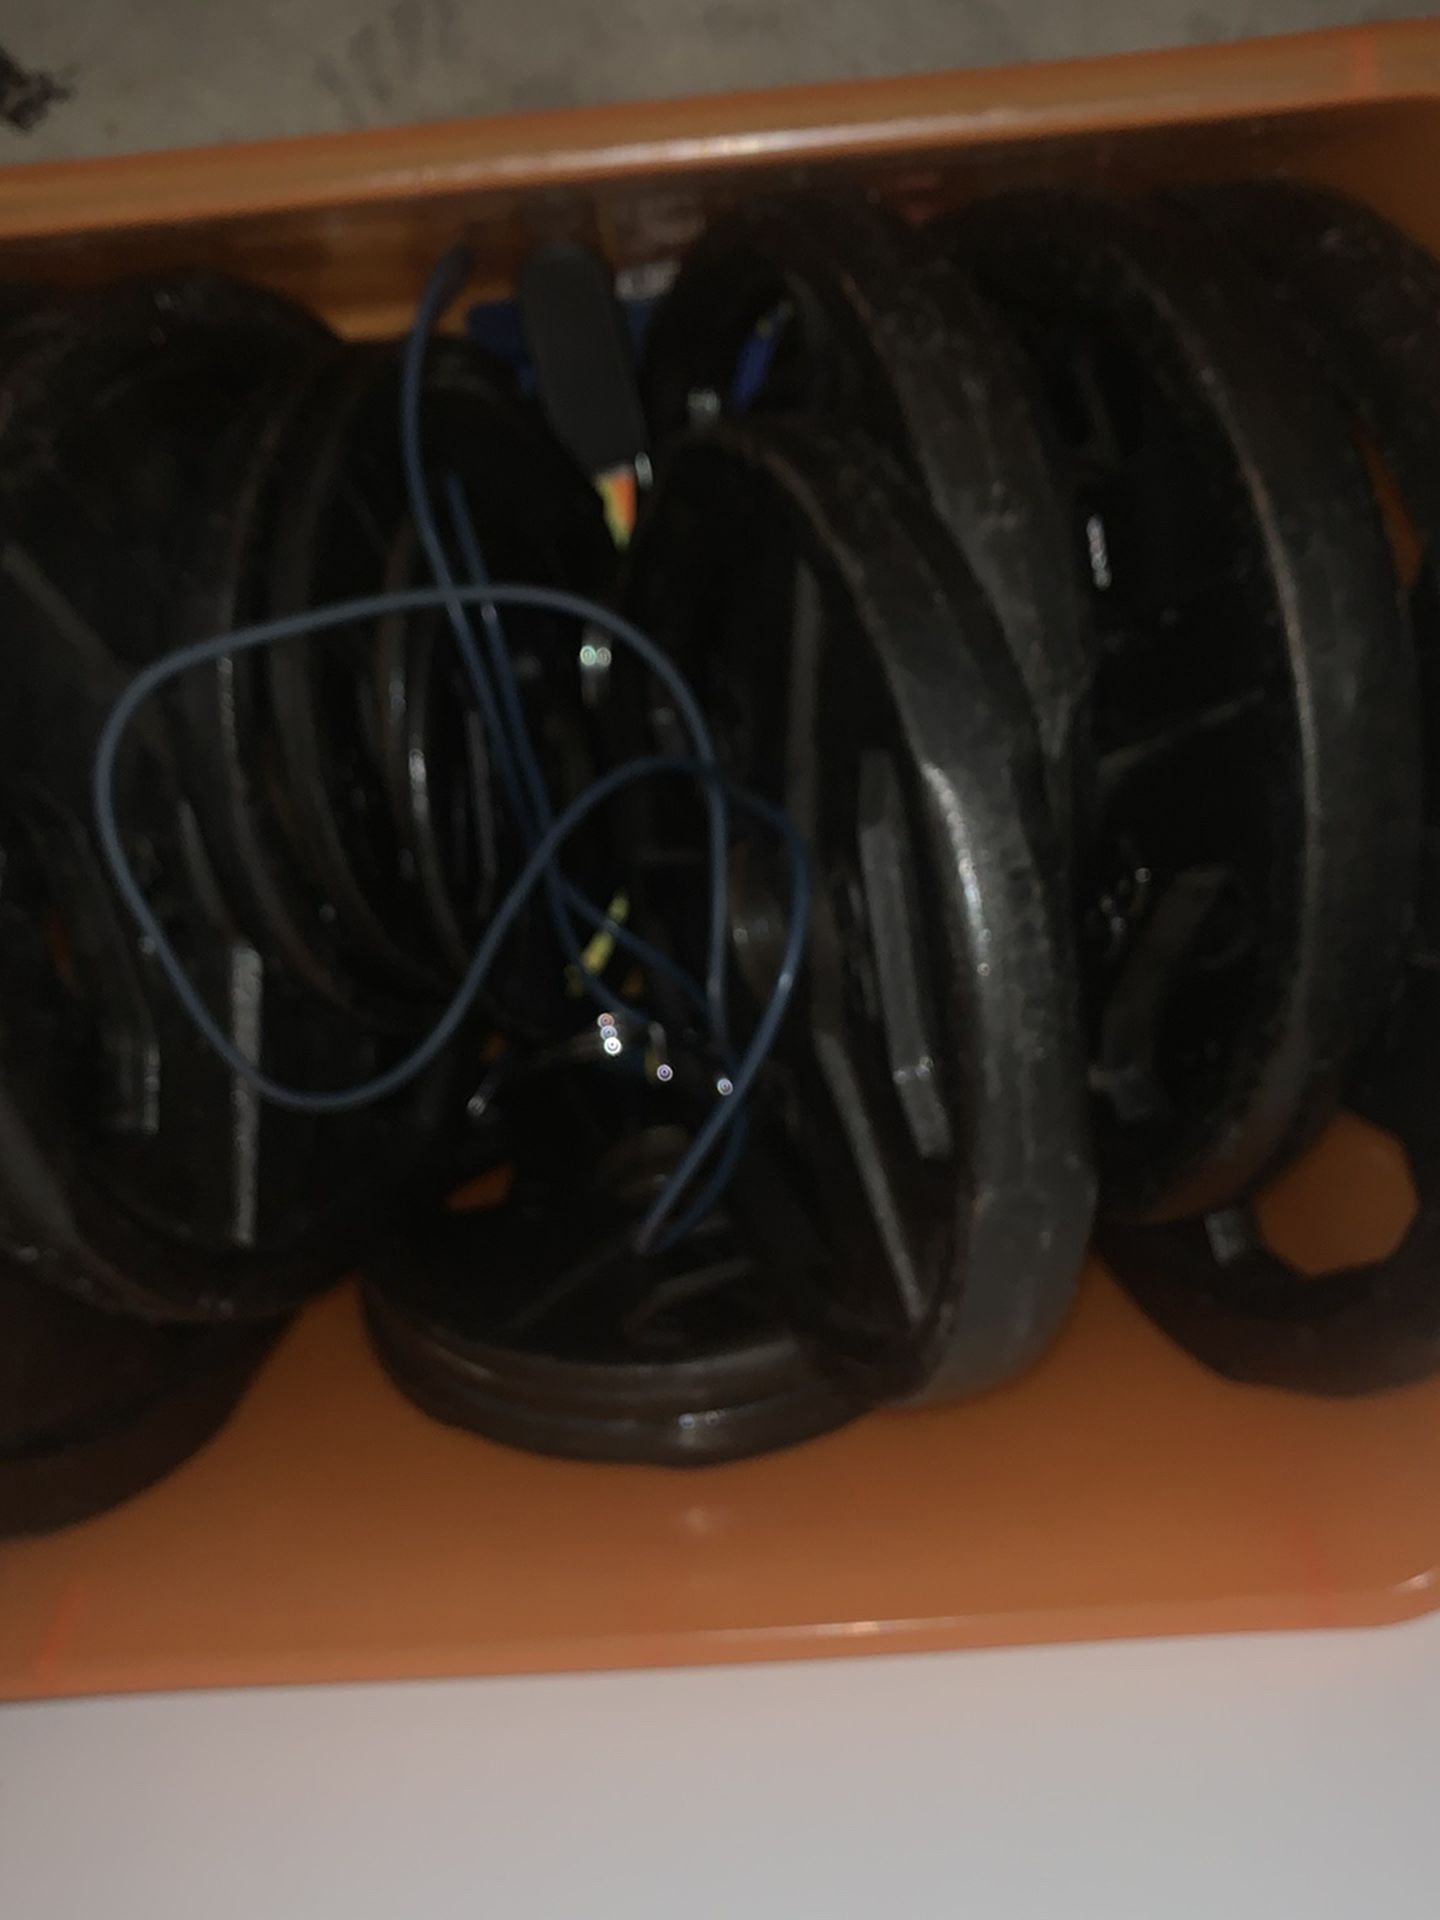 Weight Set Plates With Olympic Bar And Curl Bar! Two Dumbbells And Bench